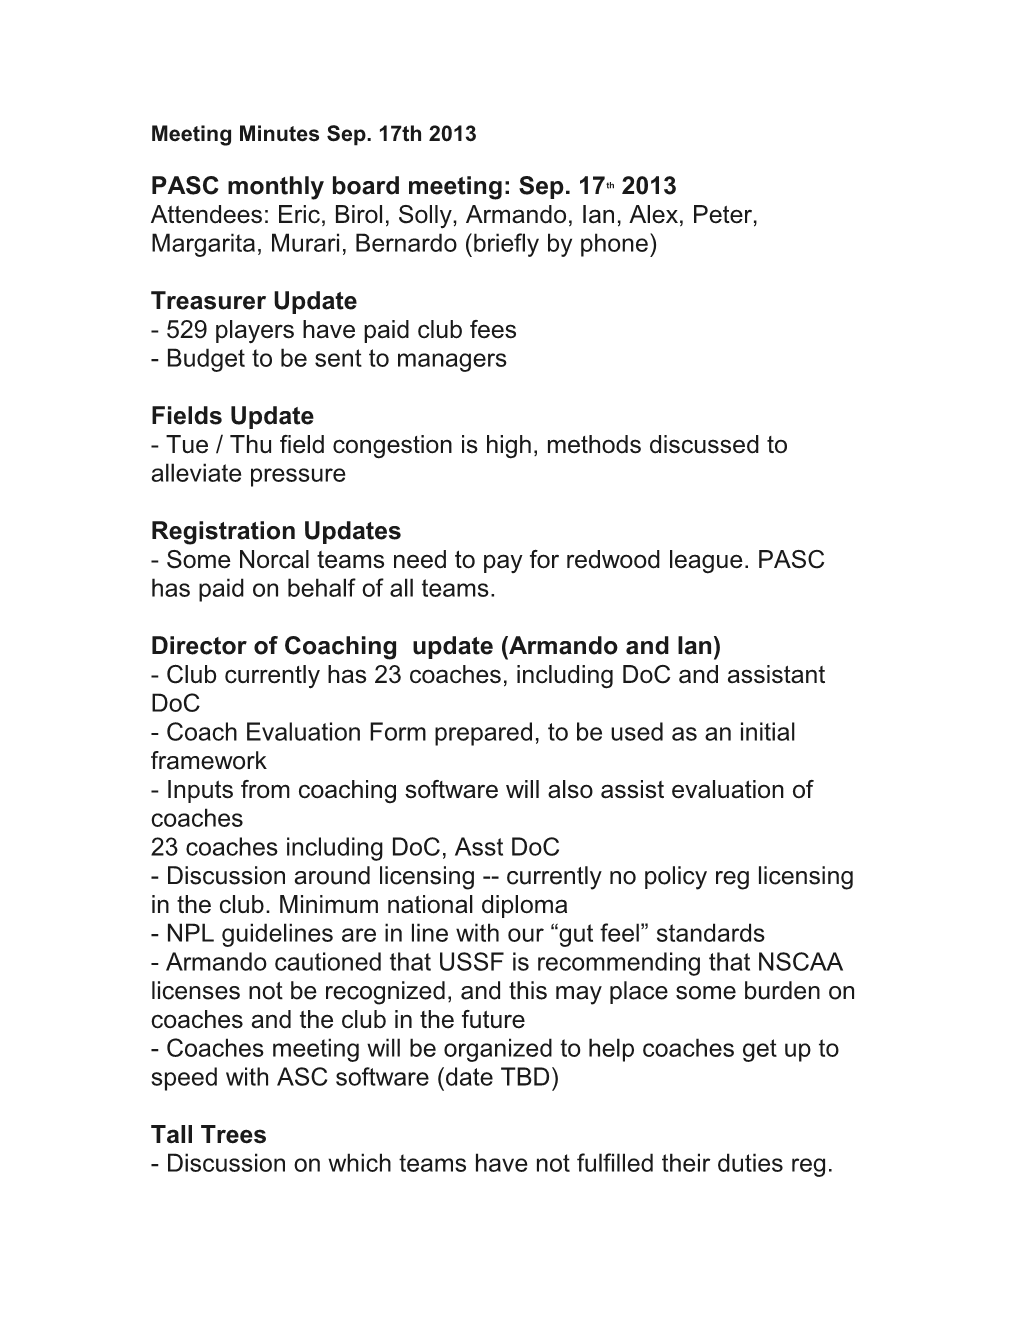 PASC Monthly Board Meeting: Sep. 17Th 2013